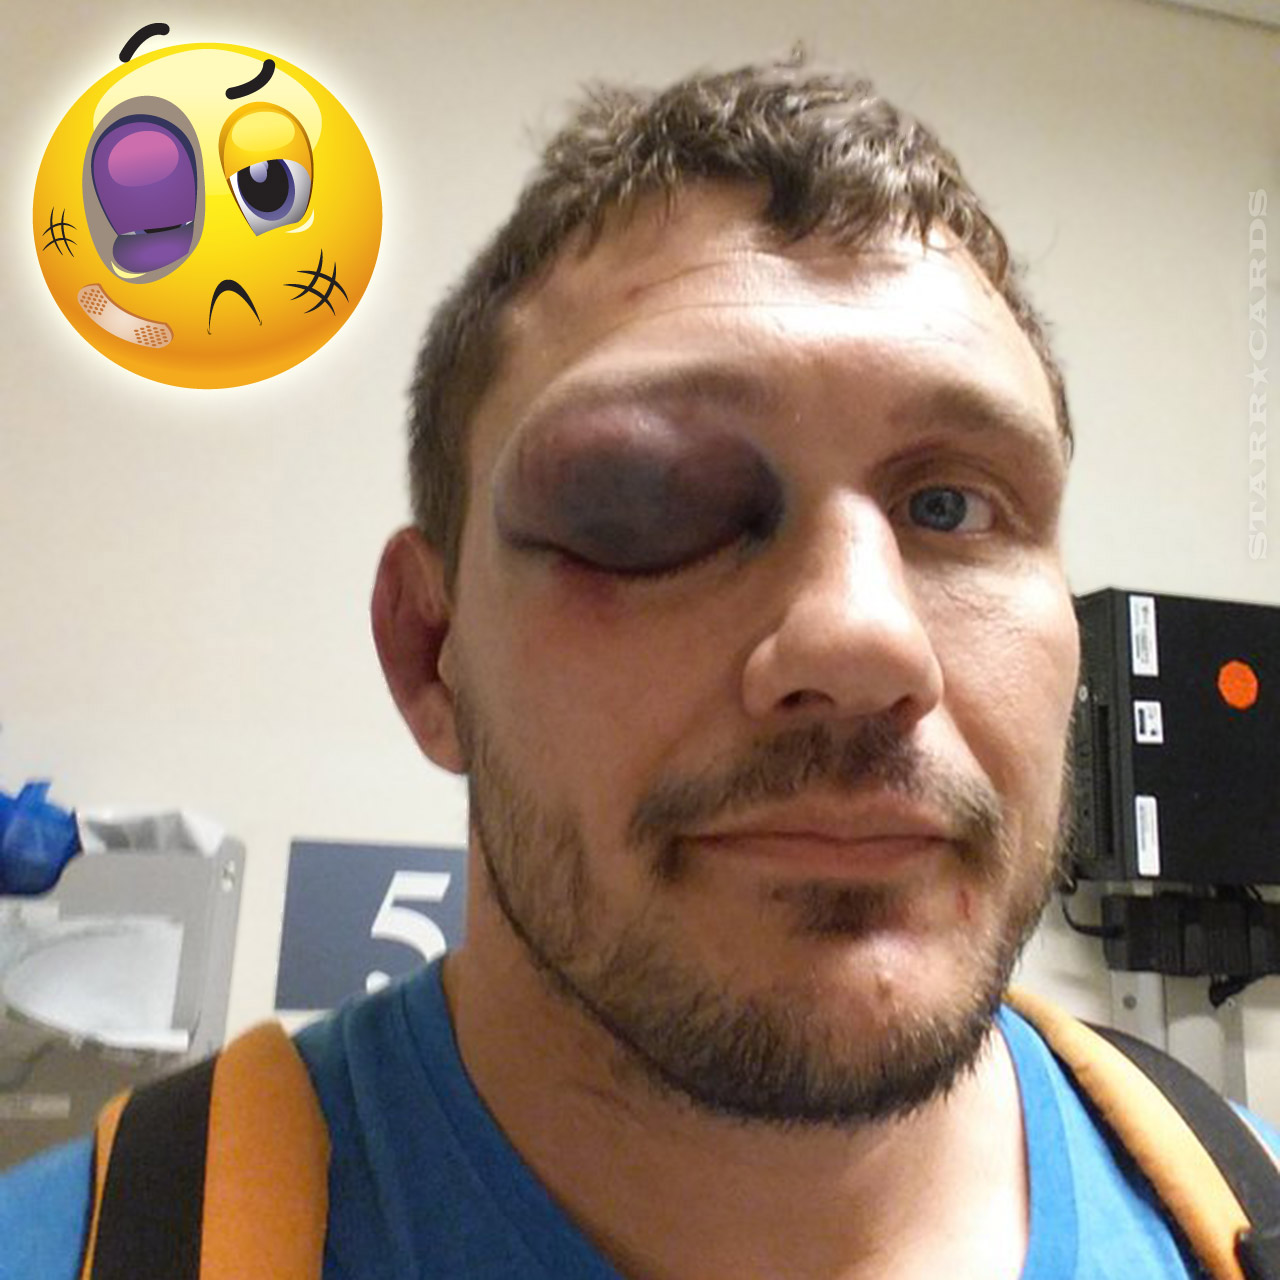 Matt Mitrione's eye swells up after fight with Travis Browne